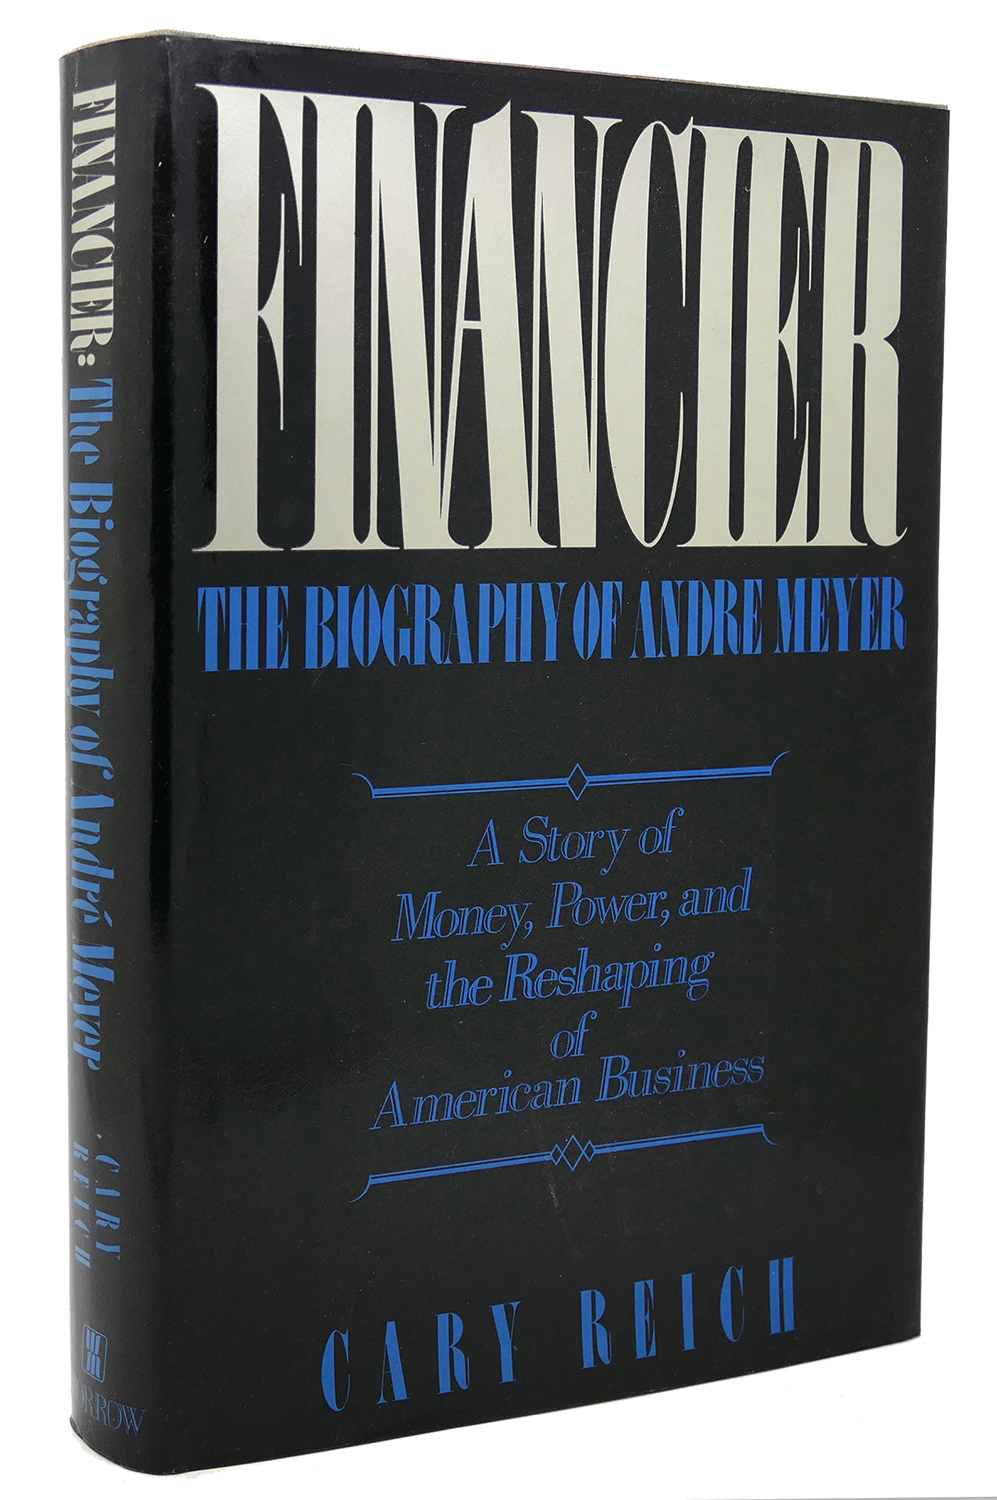 FINANCIER, THE BIOGRAPHY OF ANDRE MEYER A Story of Money, Power, and ...